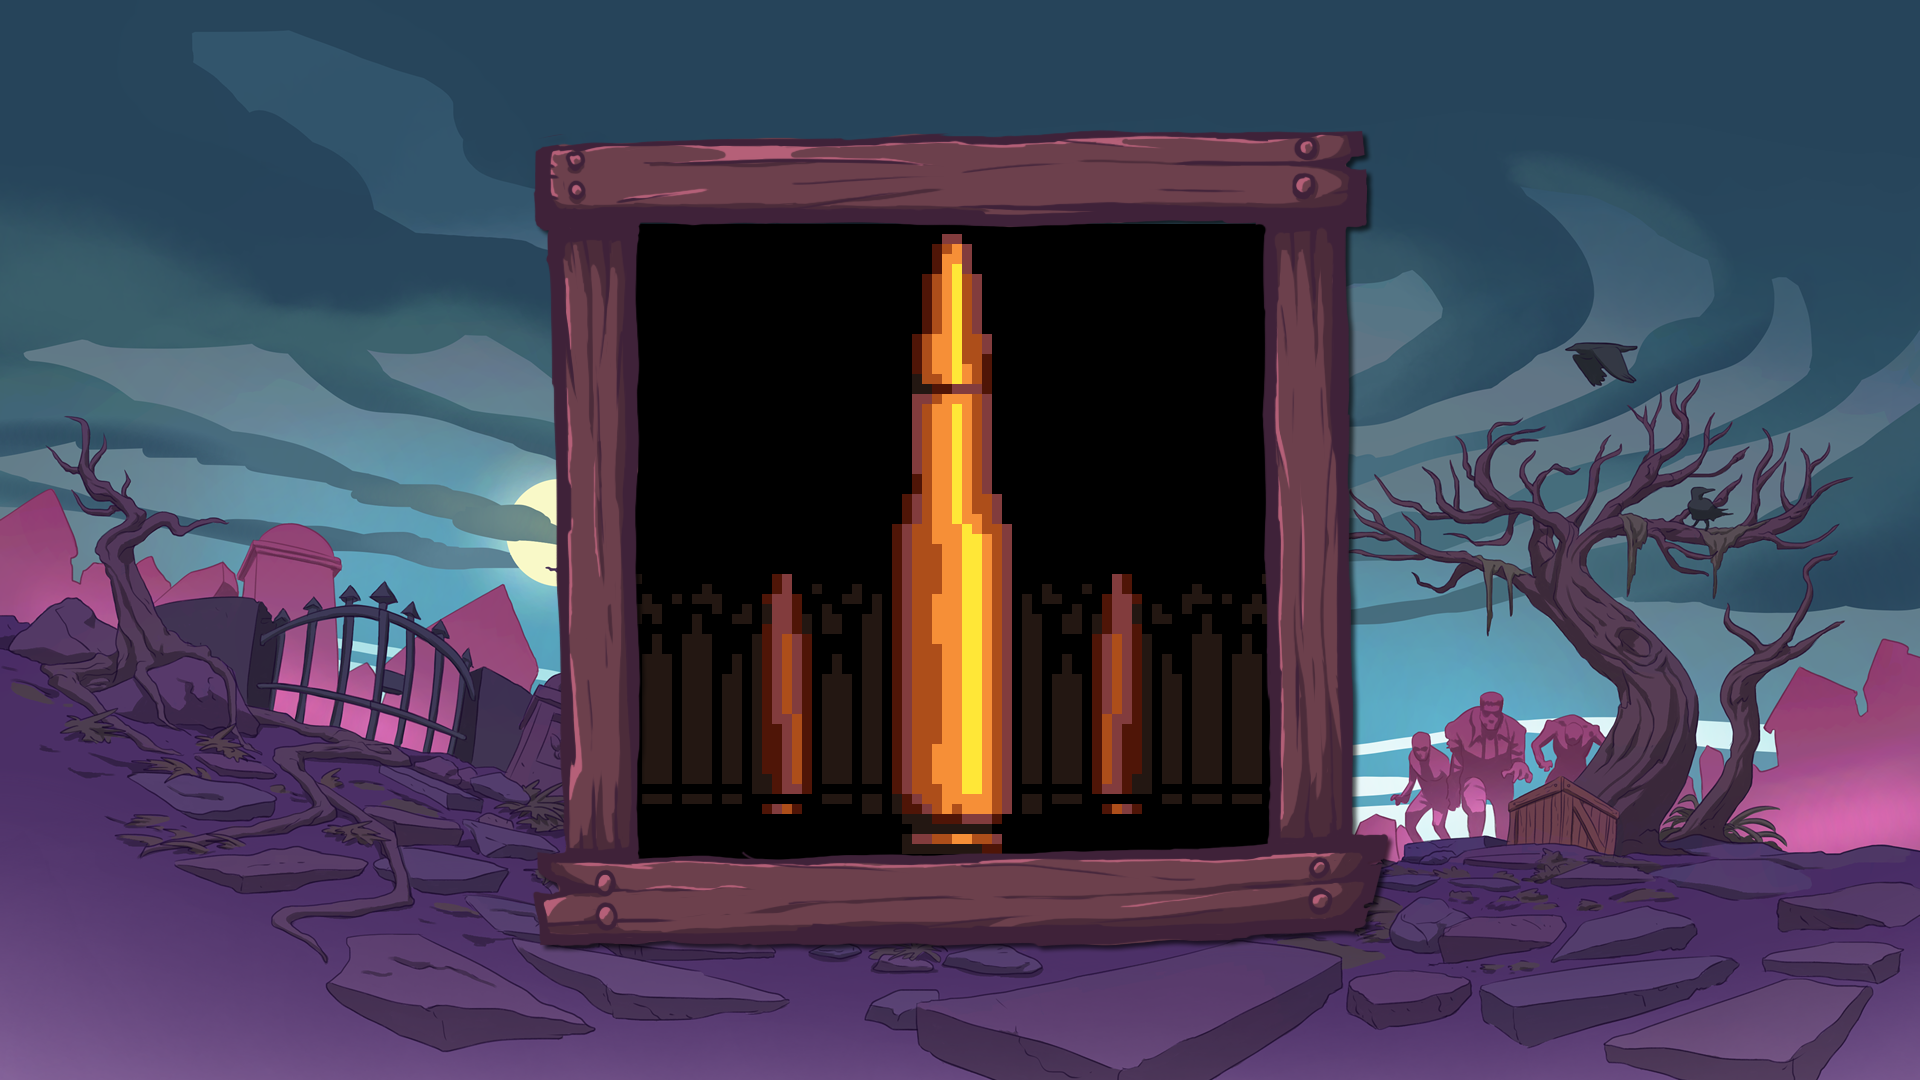 Icon for 200 Bullets Stockpile